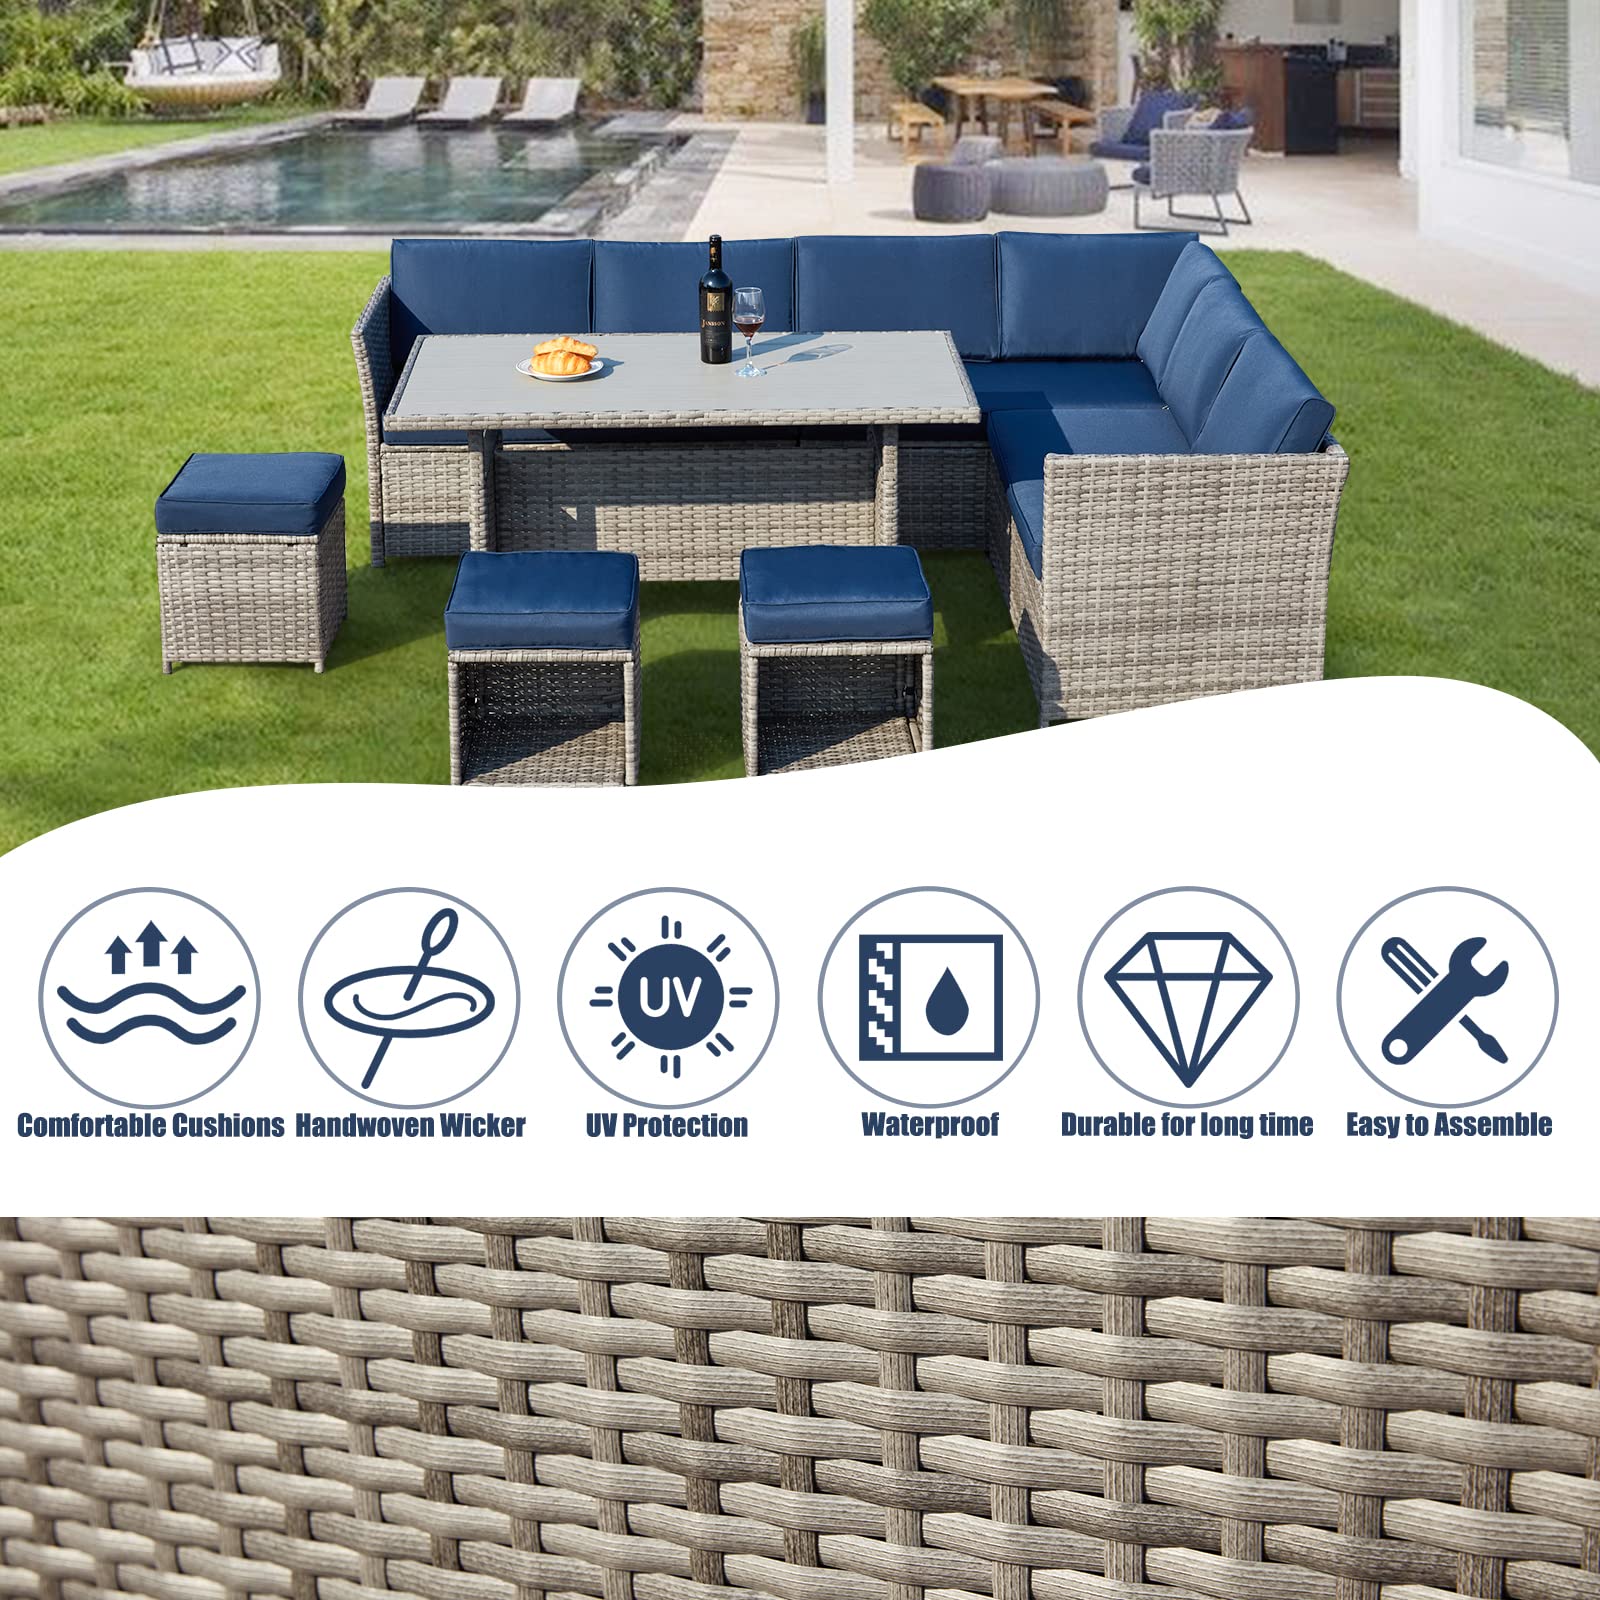 AVAWING 7 Pieces Patio Furniture Sets, Outdoor Dining Sectional Rattan Couch Sofa w/Ottoman Chairs, All-Weather Wicker Conversation Set for Lawn, Backyard, Garden, Poolside, Balcony, Blue